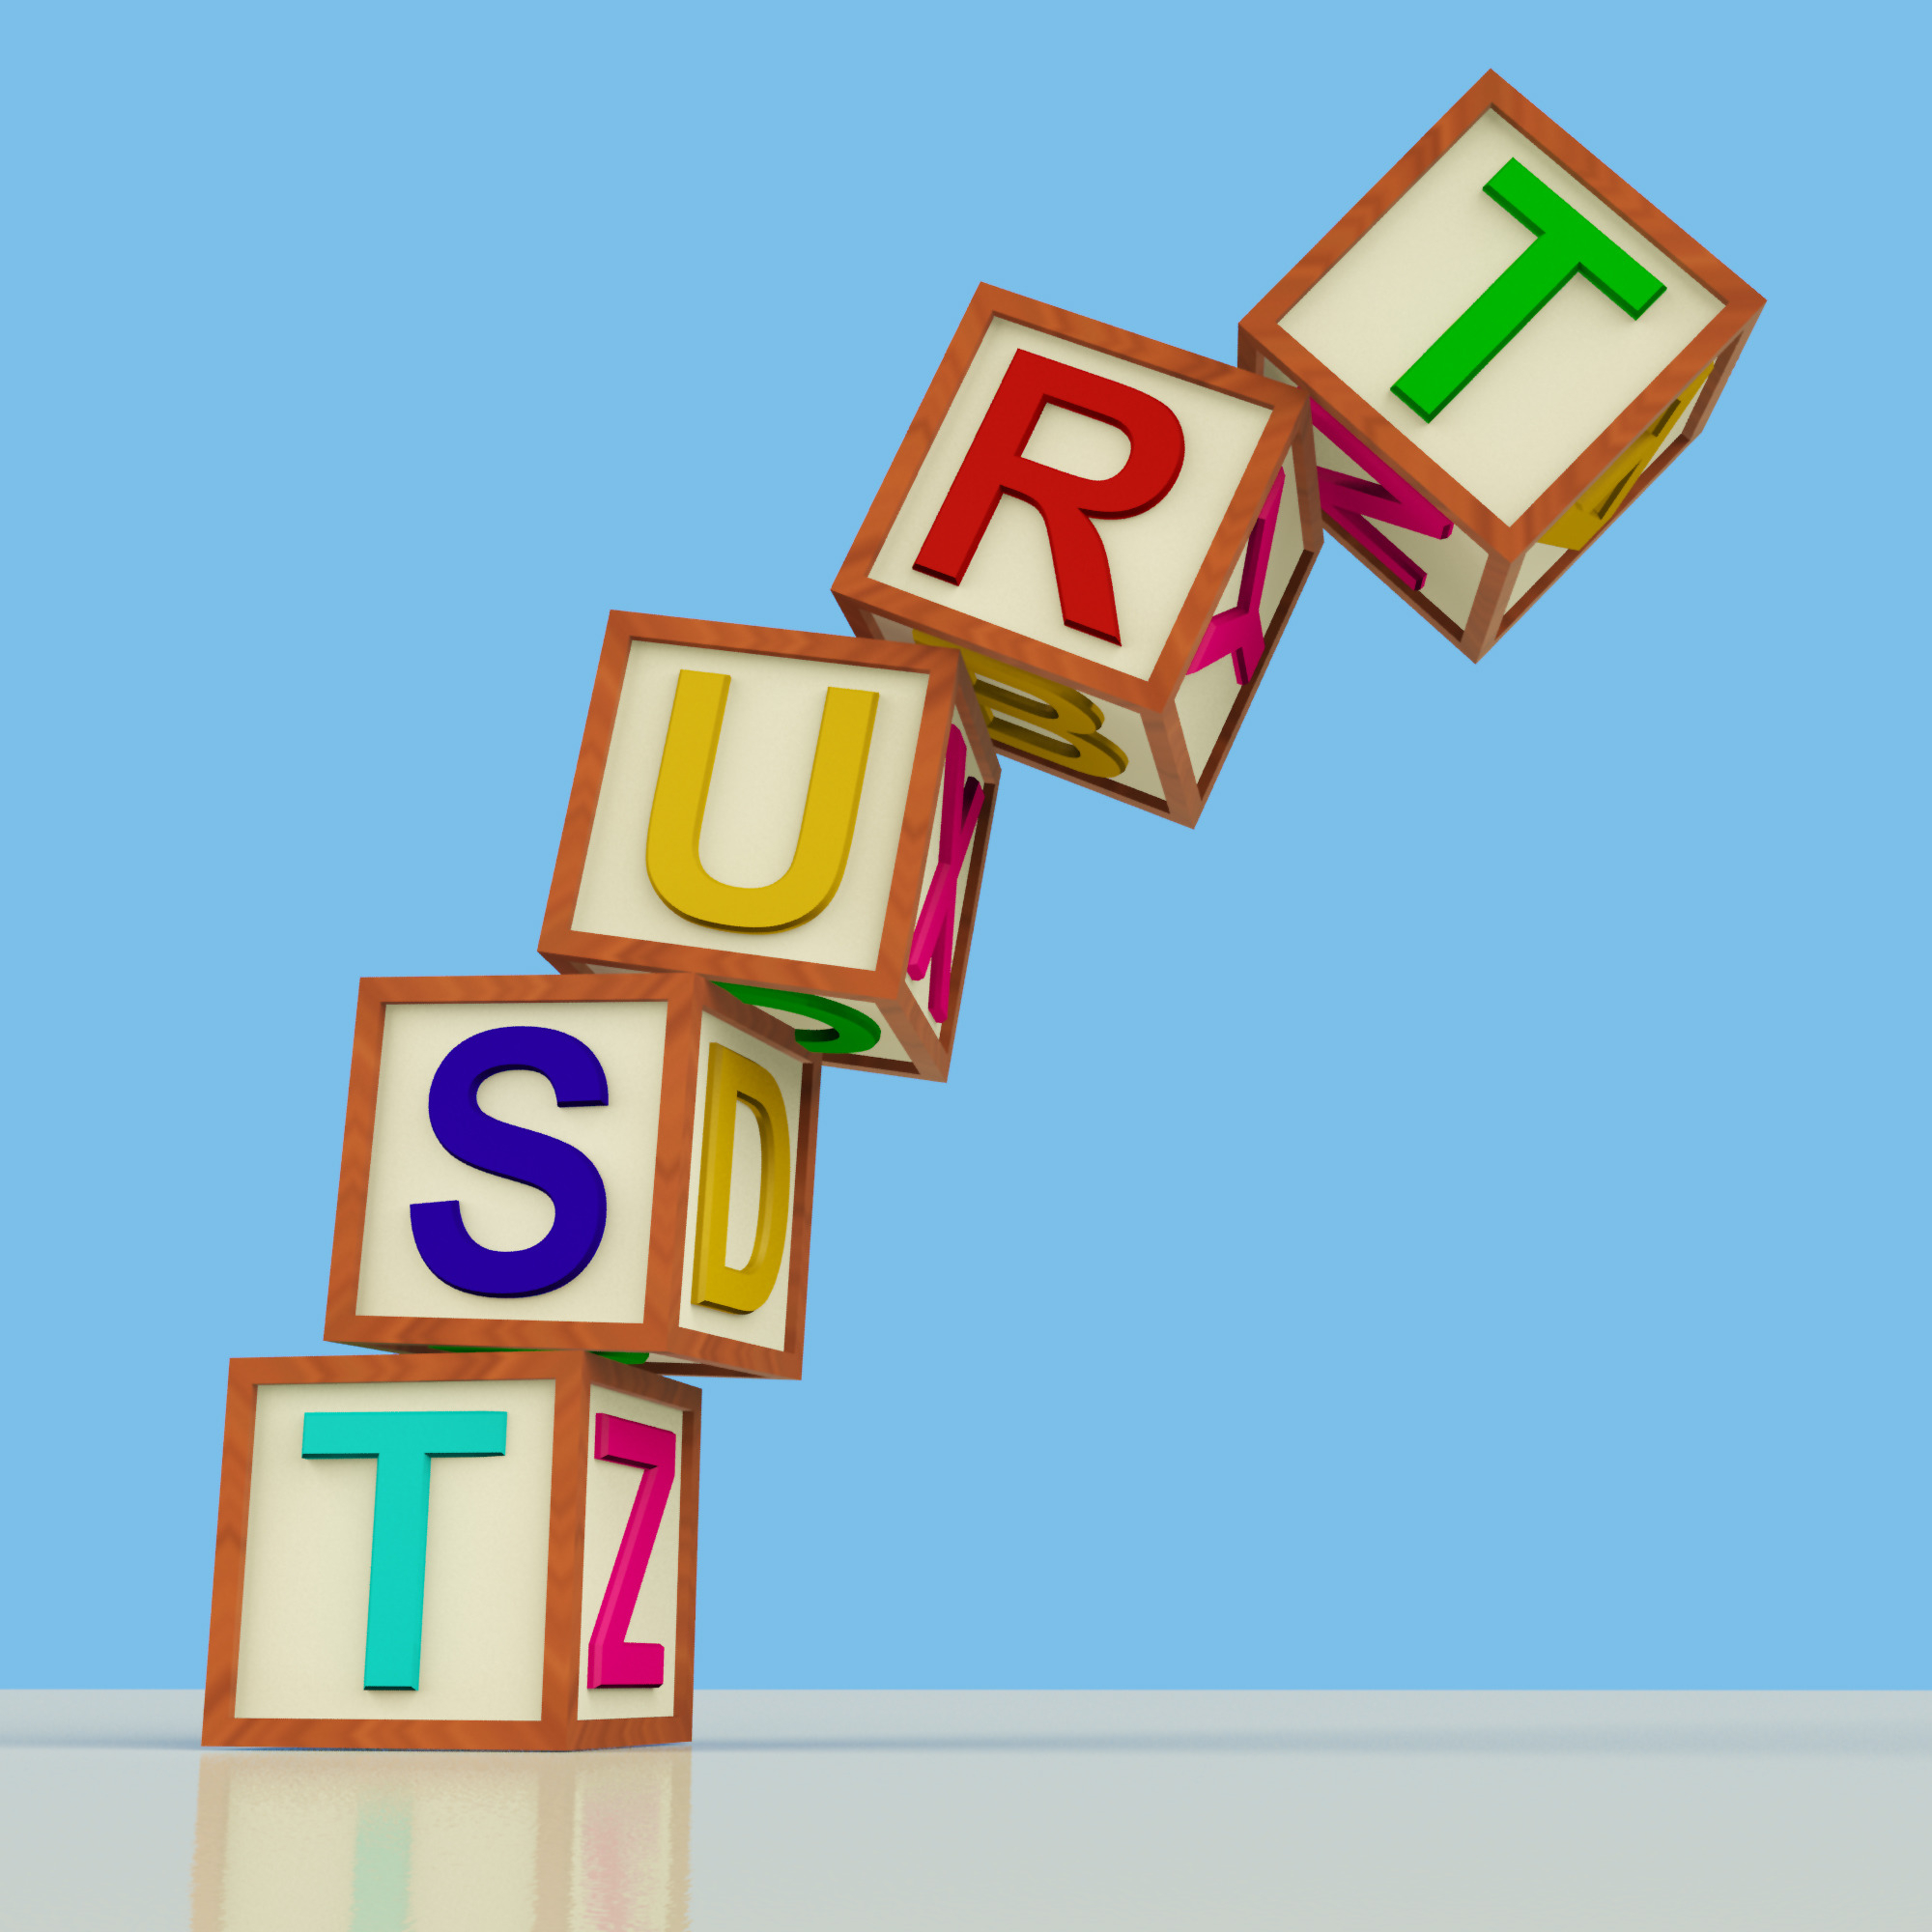 Blocks Spelling Trust Falling Over As Symbol For Lack Of Confidence